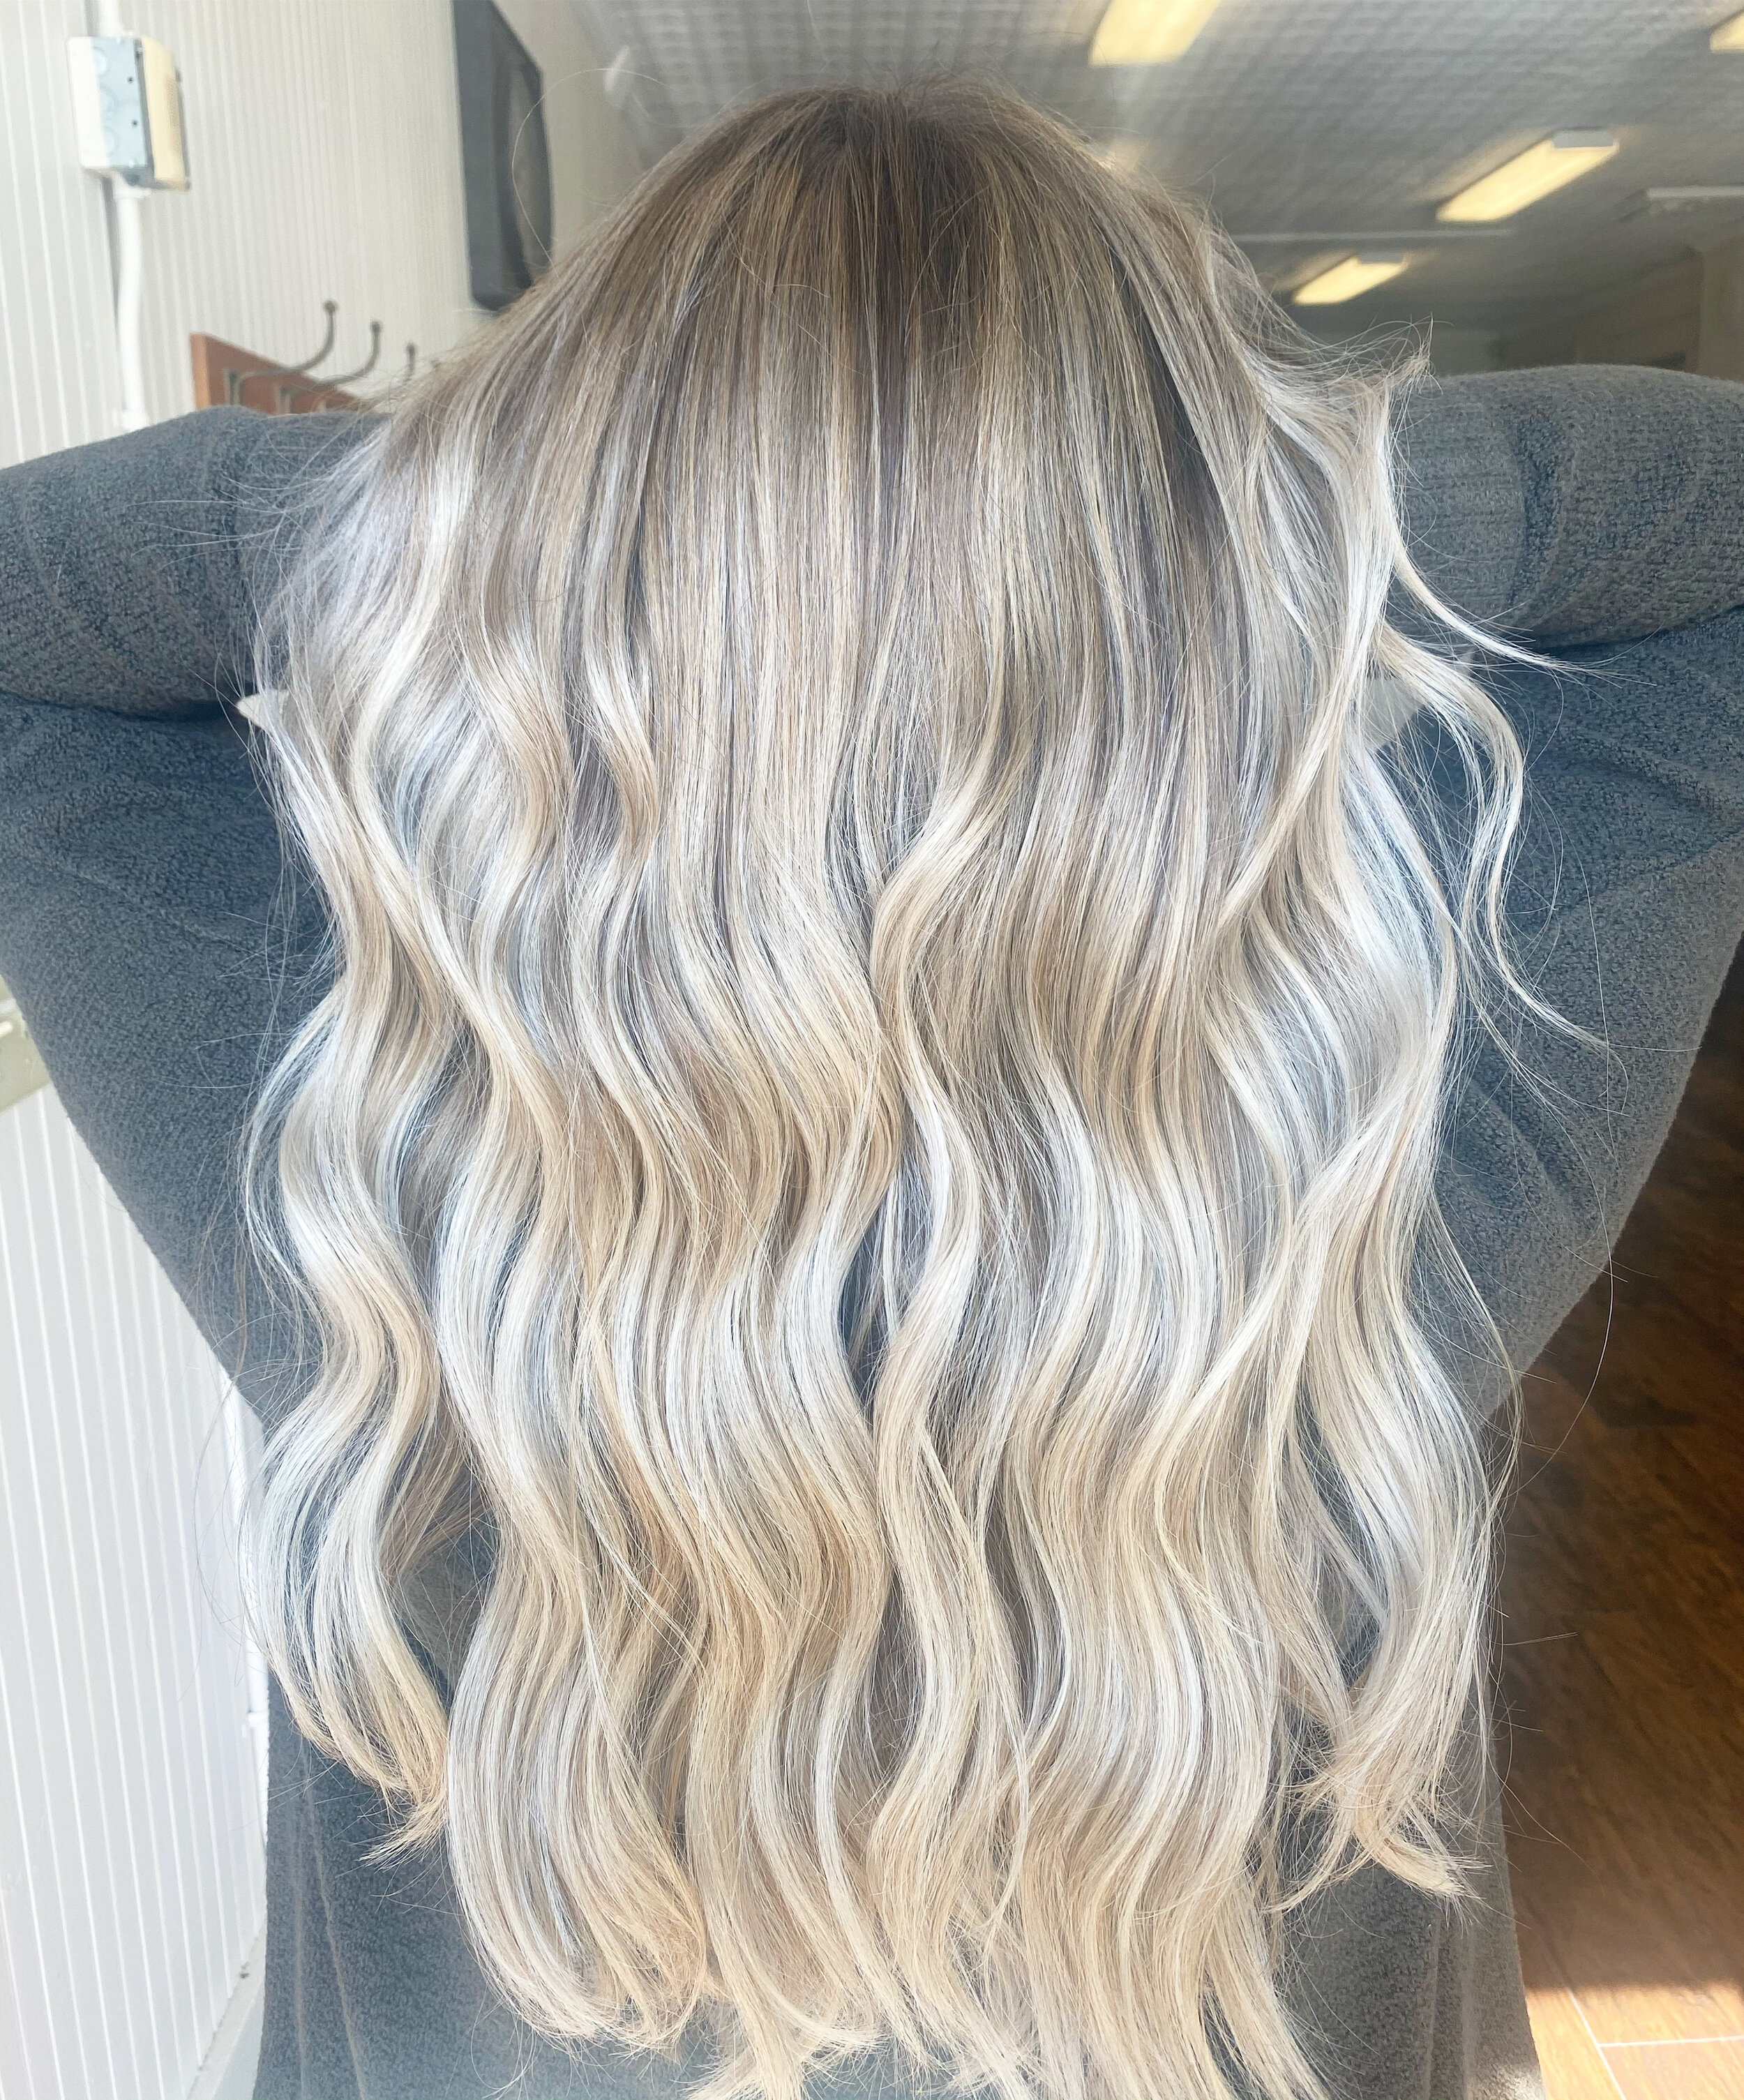 Rooted, icy blonde created by Carleigh Dlugosz